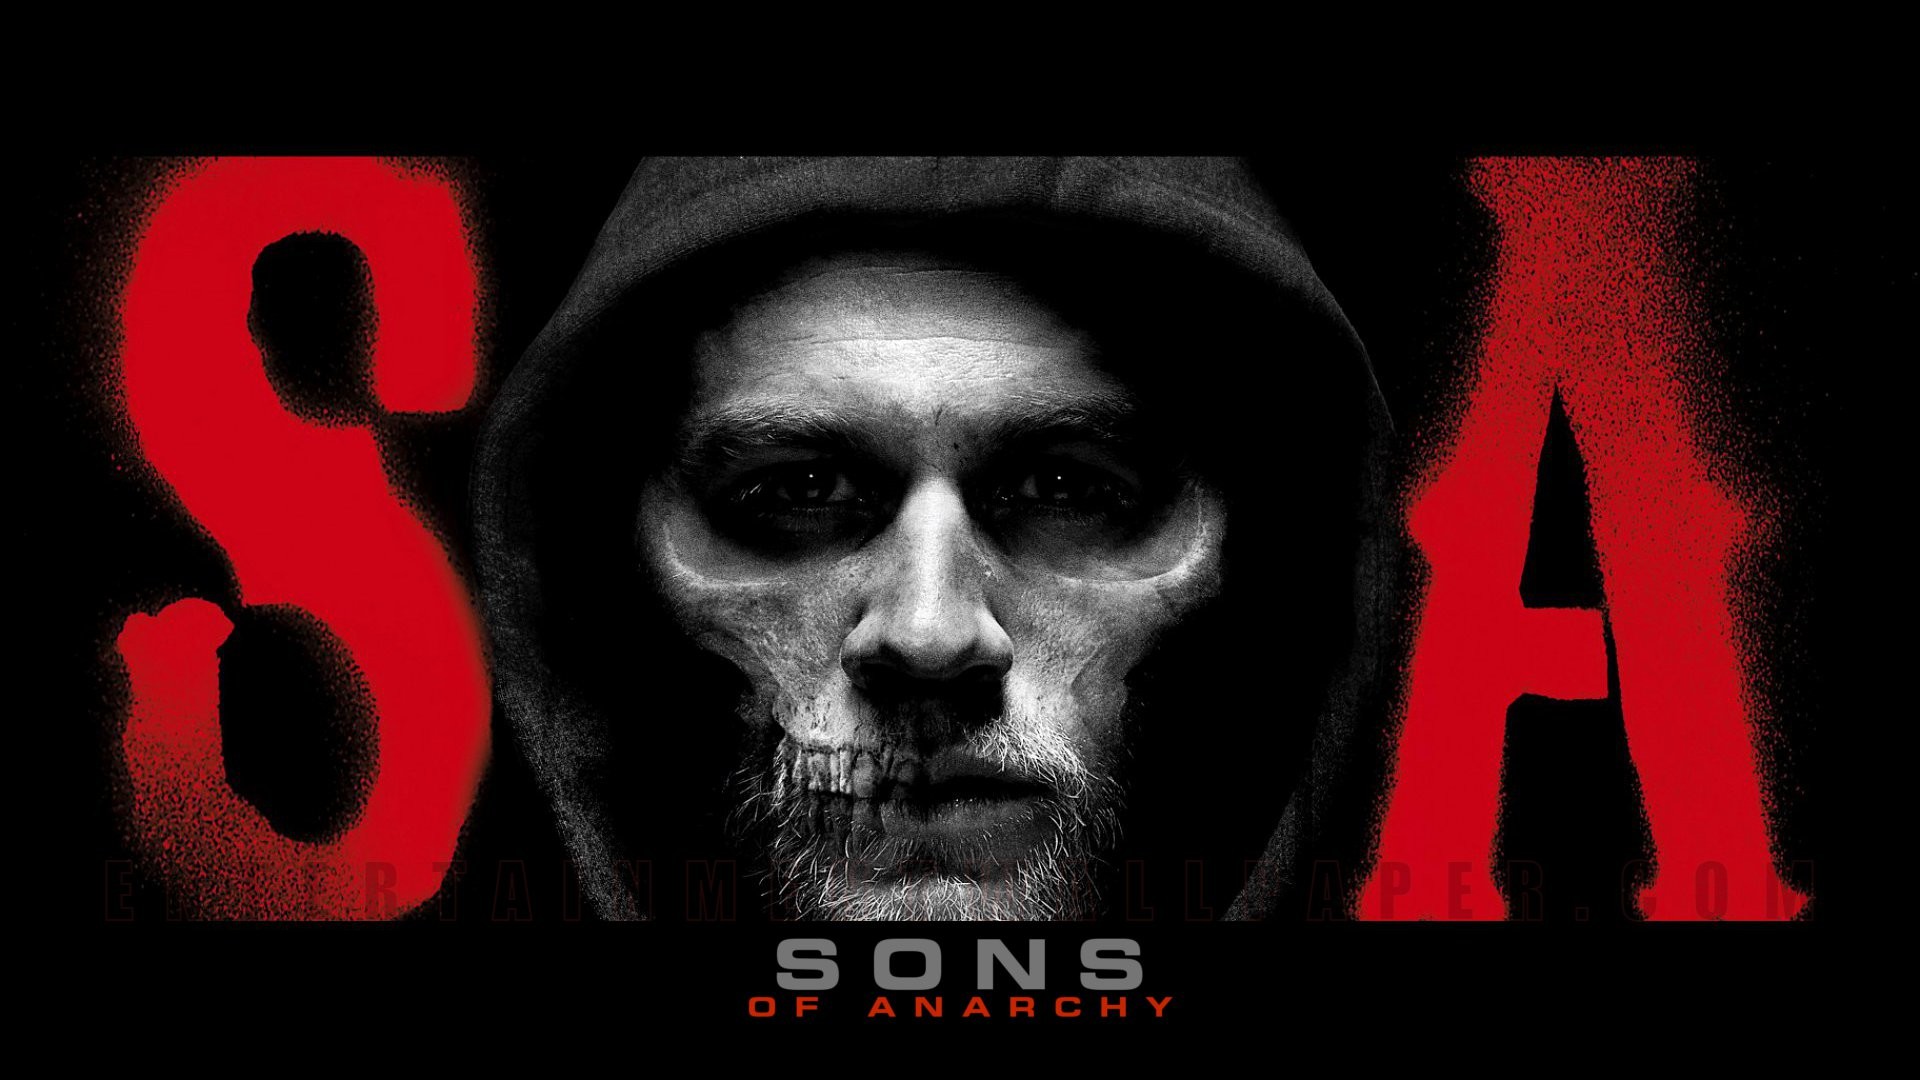 1920x1080 Sons of Anarchy Wallpaper - Original size, download now.